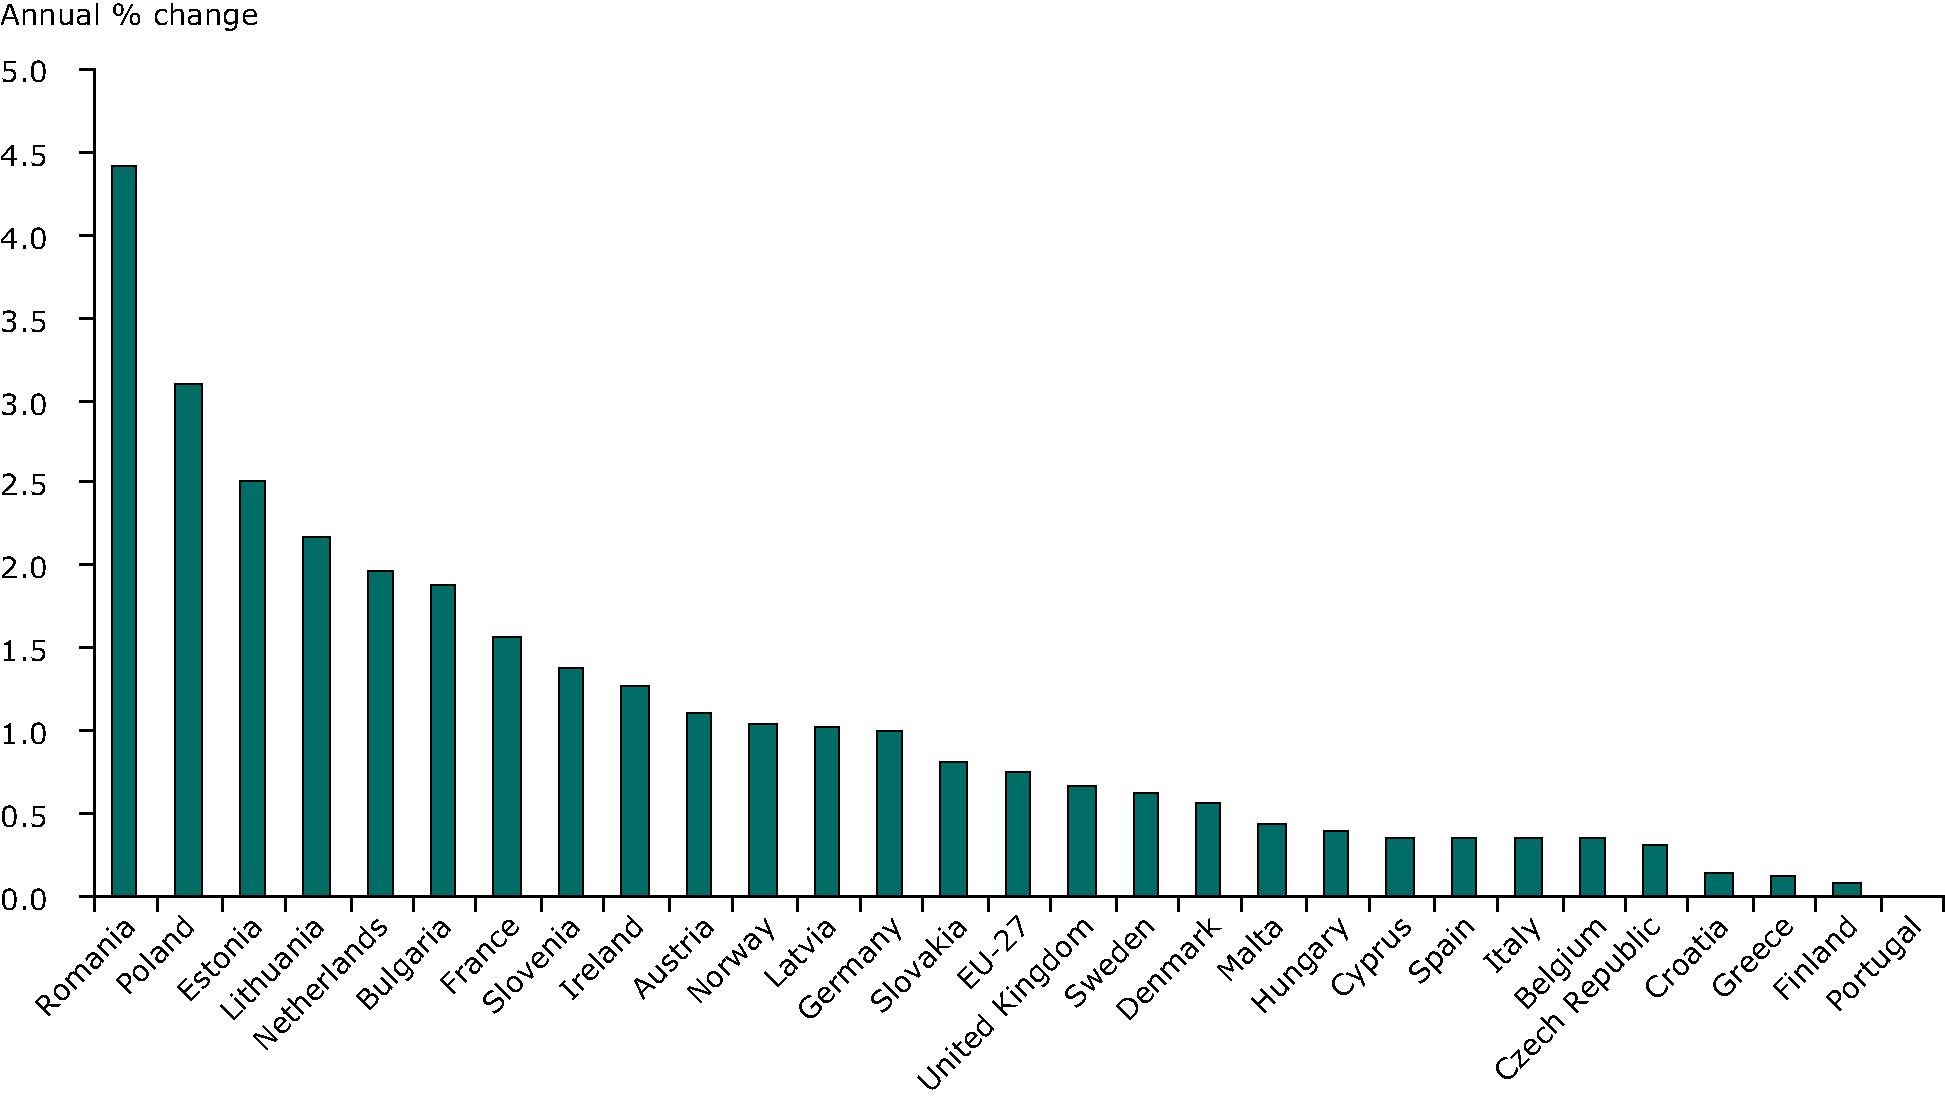 Energy Efficiency ODEX  by country